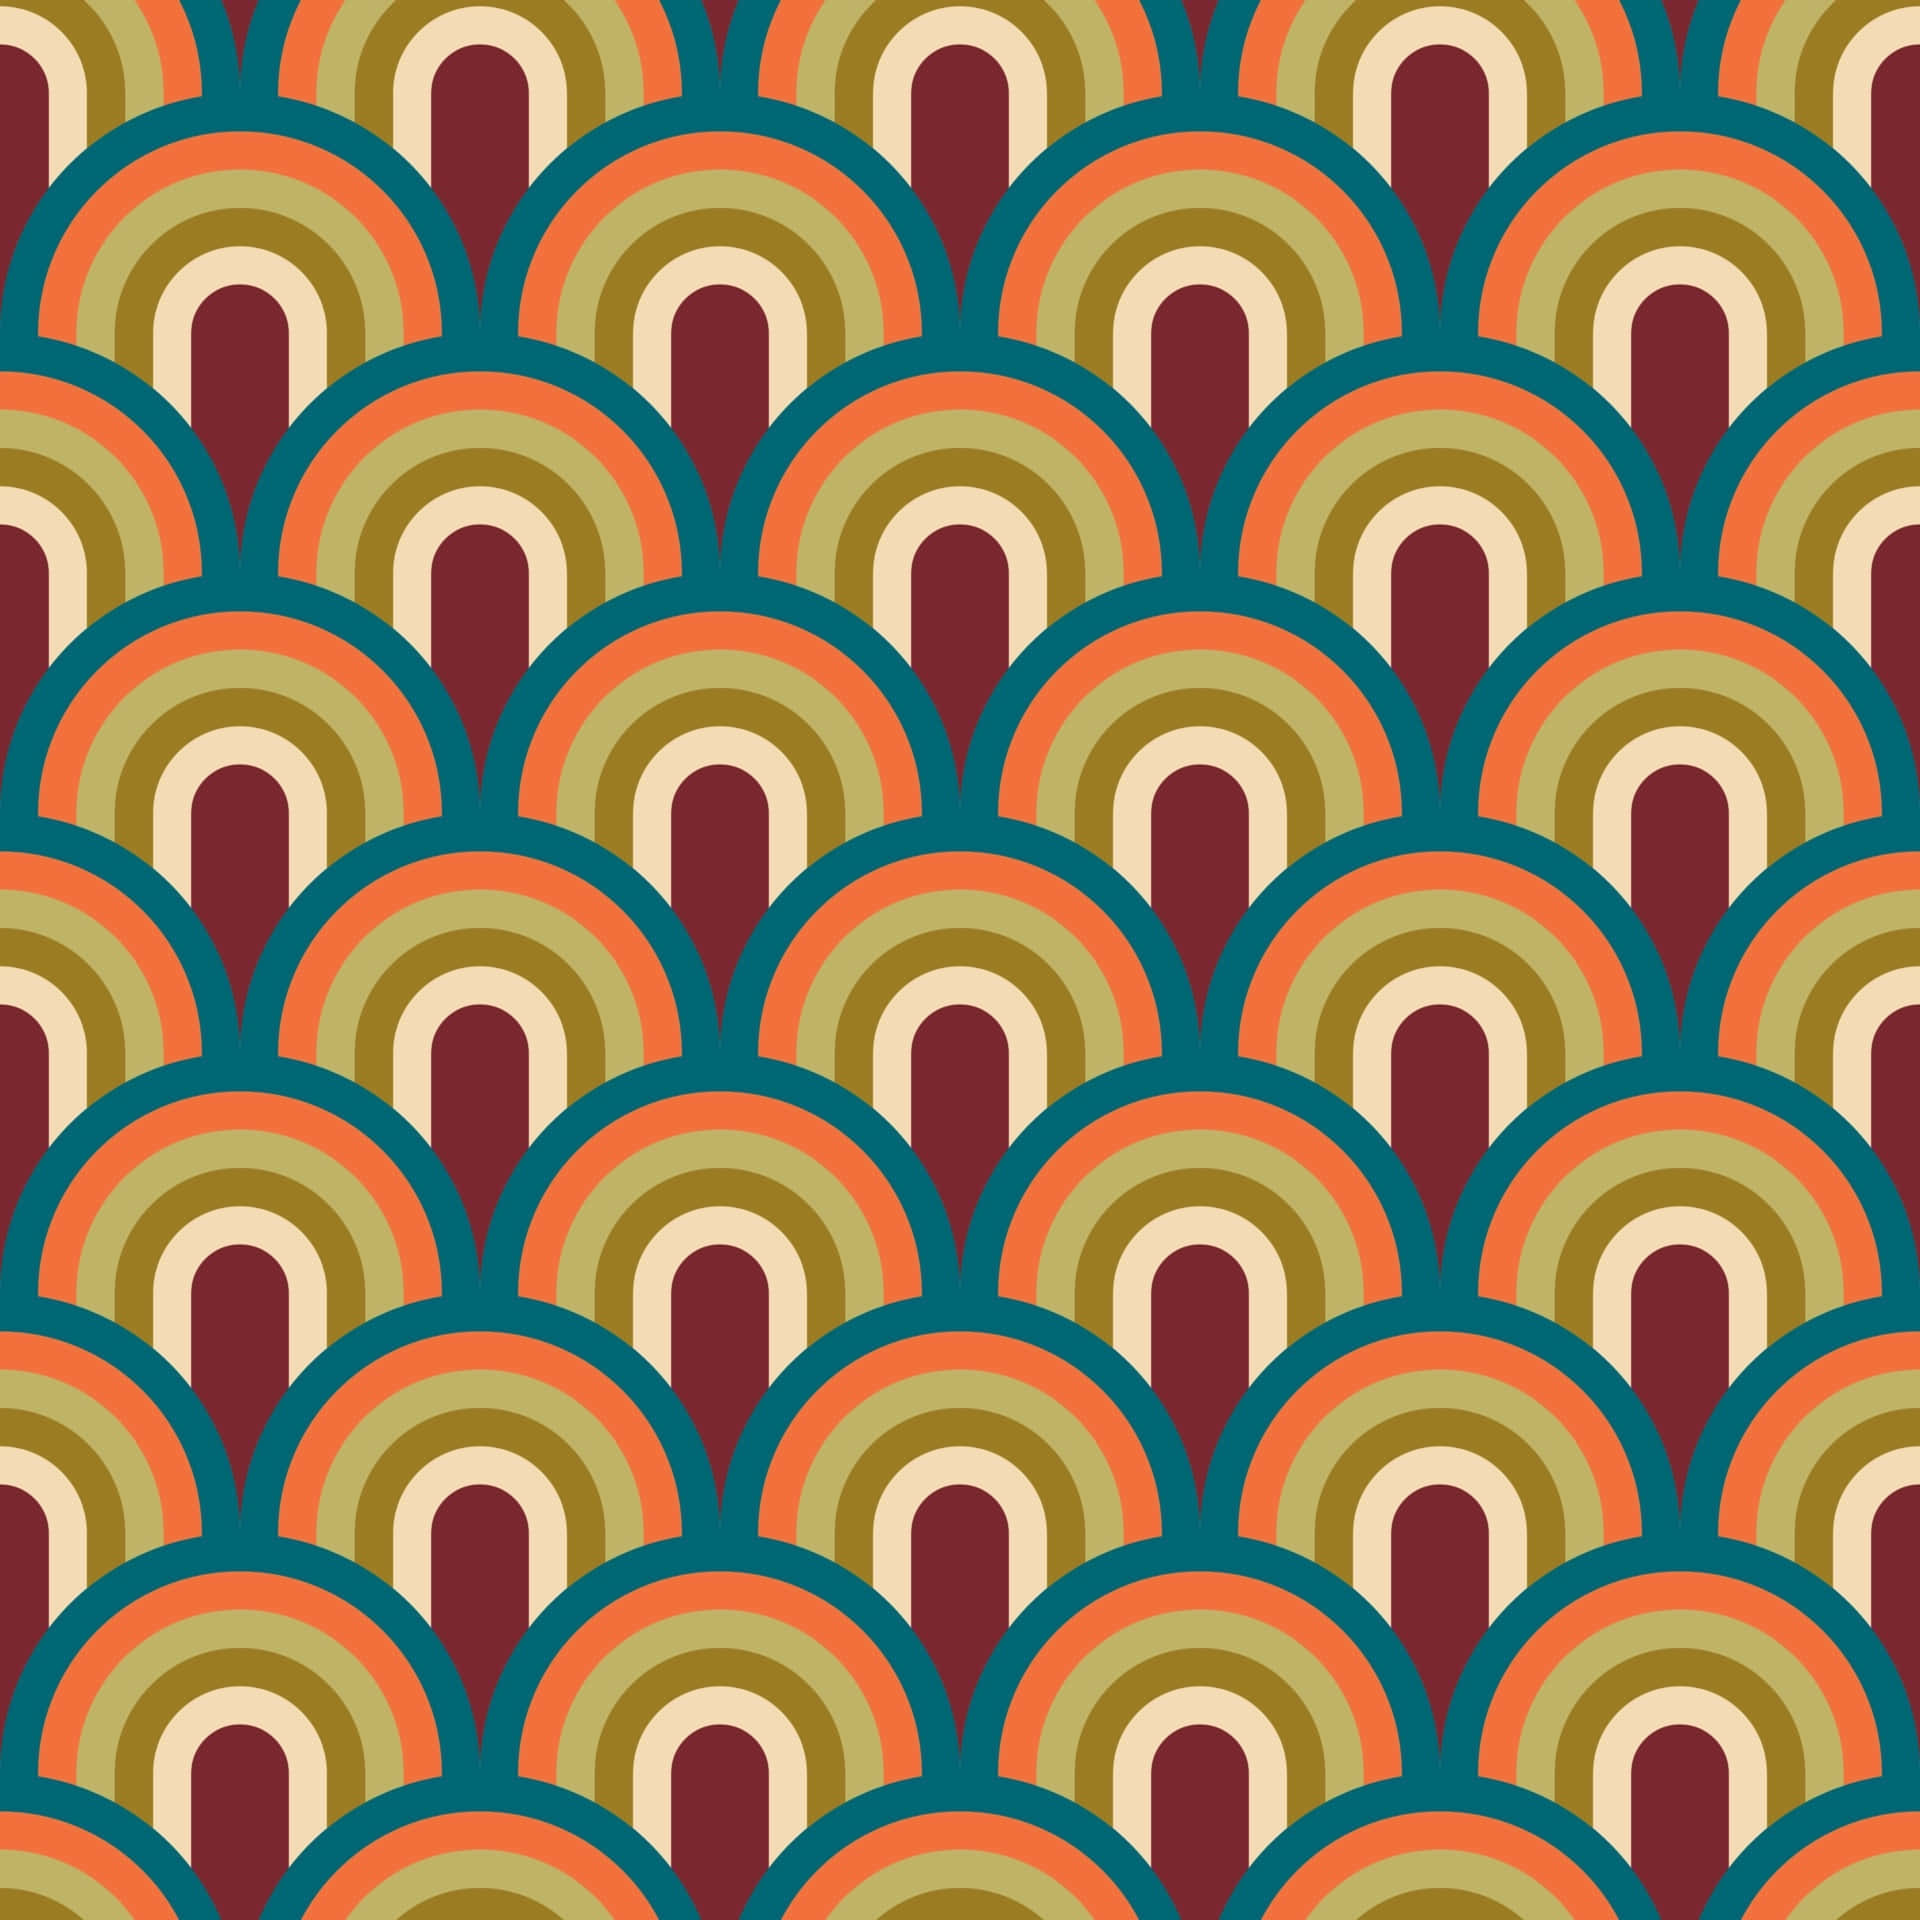 Relive the nostalgia of the 1960s with this classic background!